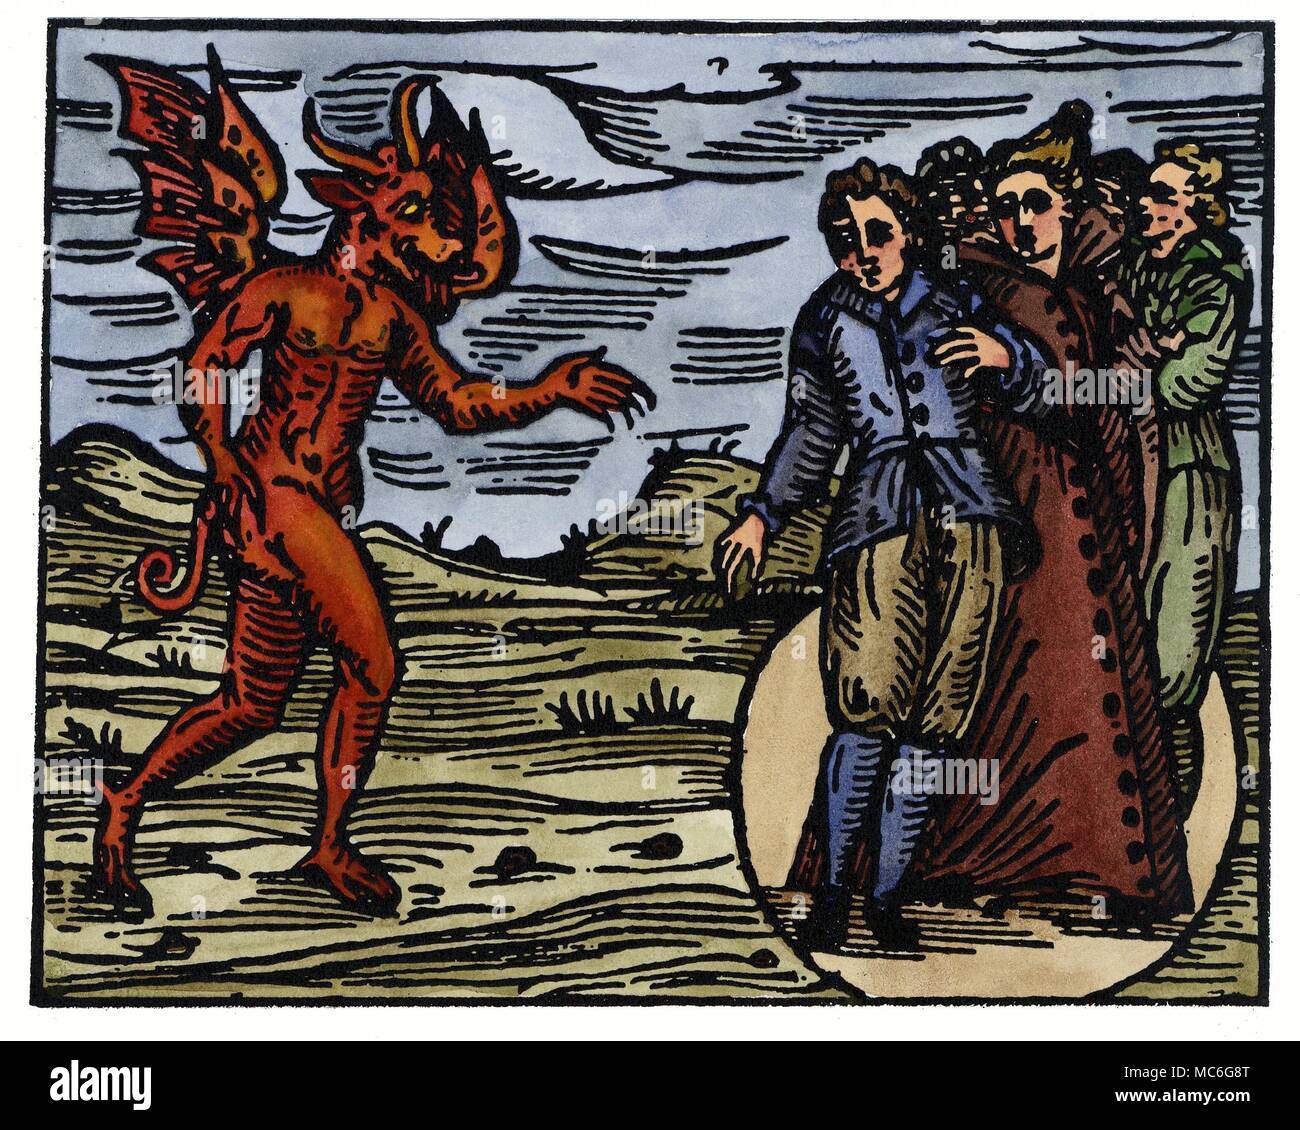 WITCHCRAFT - DEMONS Witches swearing allegiance to the Devil, whilst standing in a circle marked out in the earth. Hand-coloured print from Francesco Maria Guazzo, Compendium Maleficarum, 1608. This was the most learned and precise of mediaeval witchcraft manuals, and in some respects (because it paid homage to the superstitions of the worst kind) one of the most horrible. Stock Photo